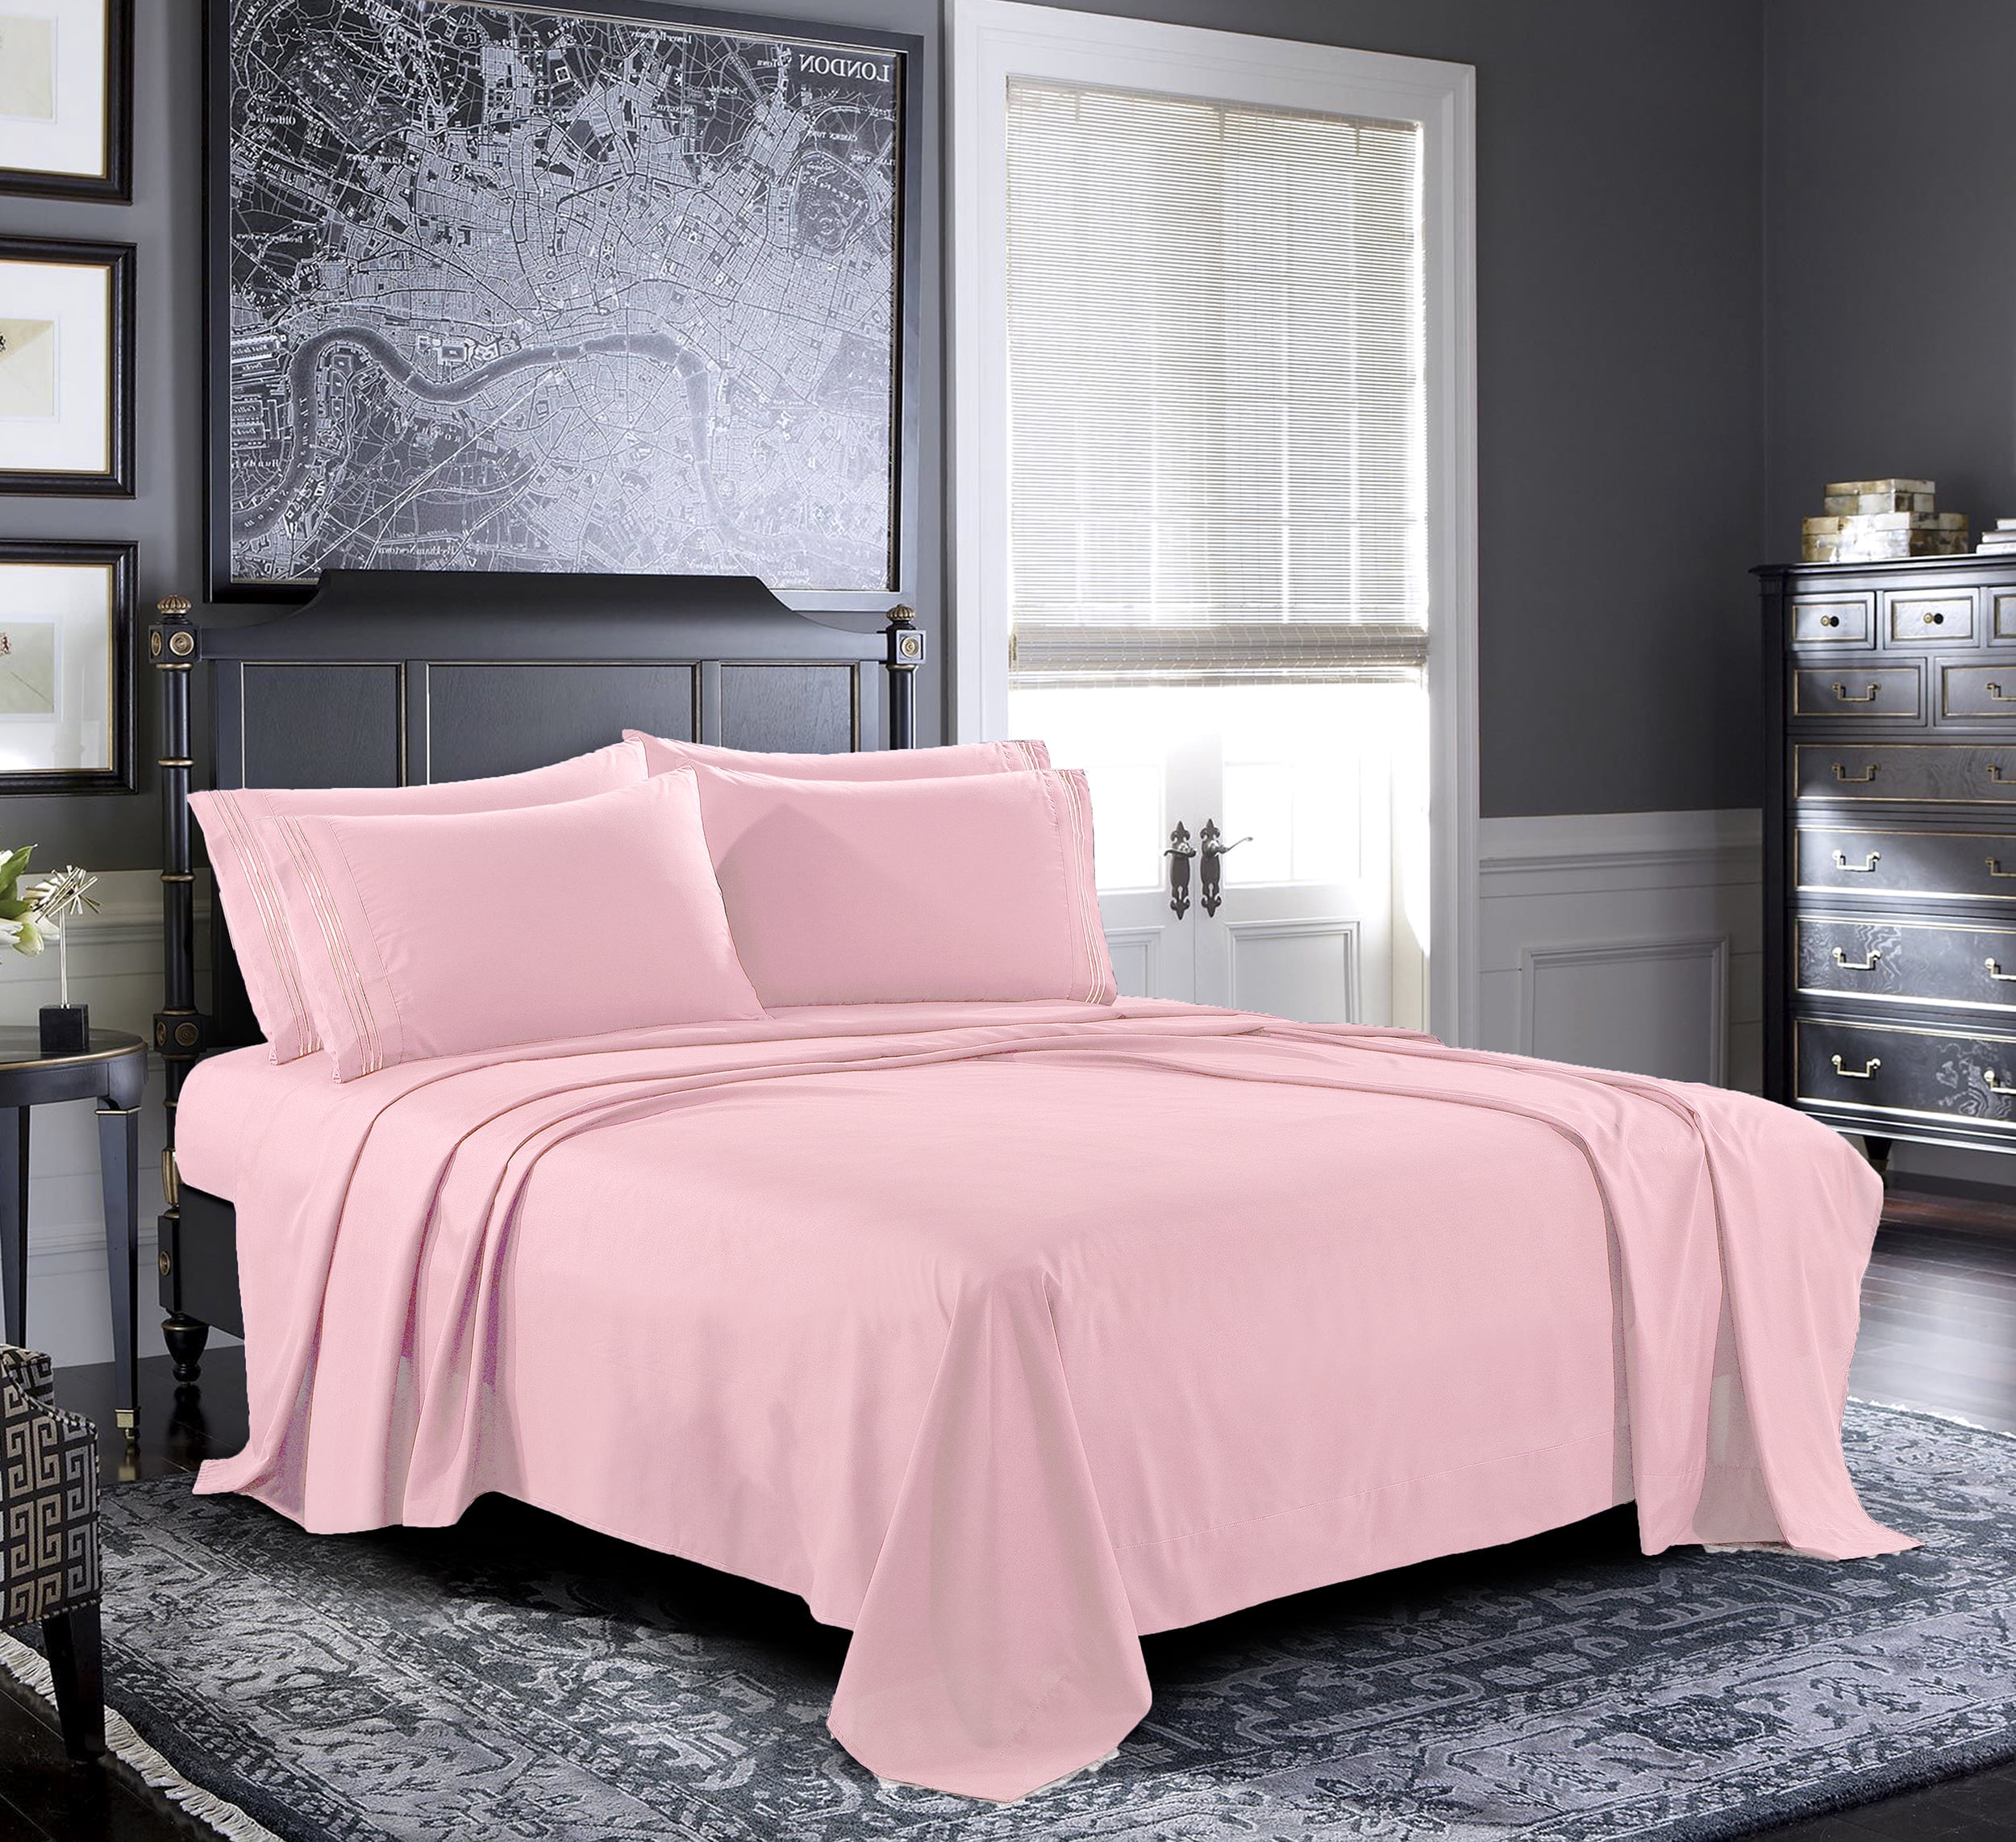 Mohap Queen Sheets Pink - Soft 1800 Sheets for Queen Size Bed, 4